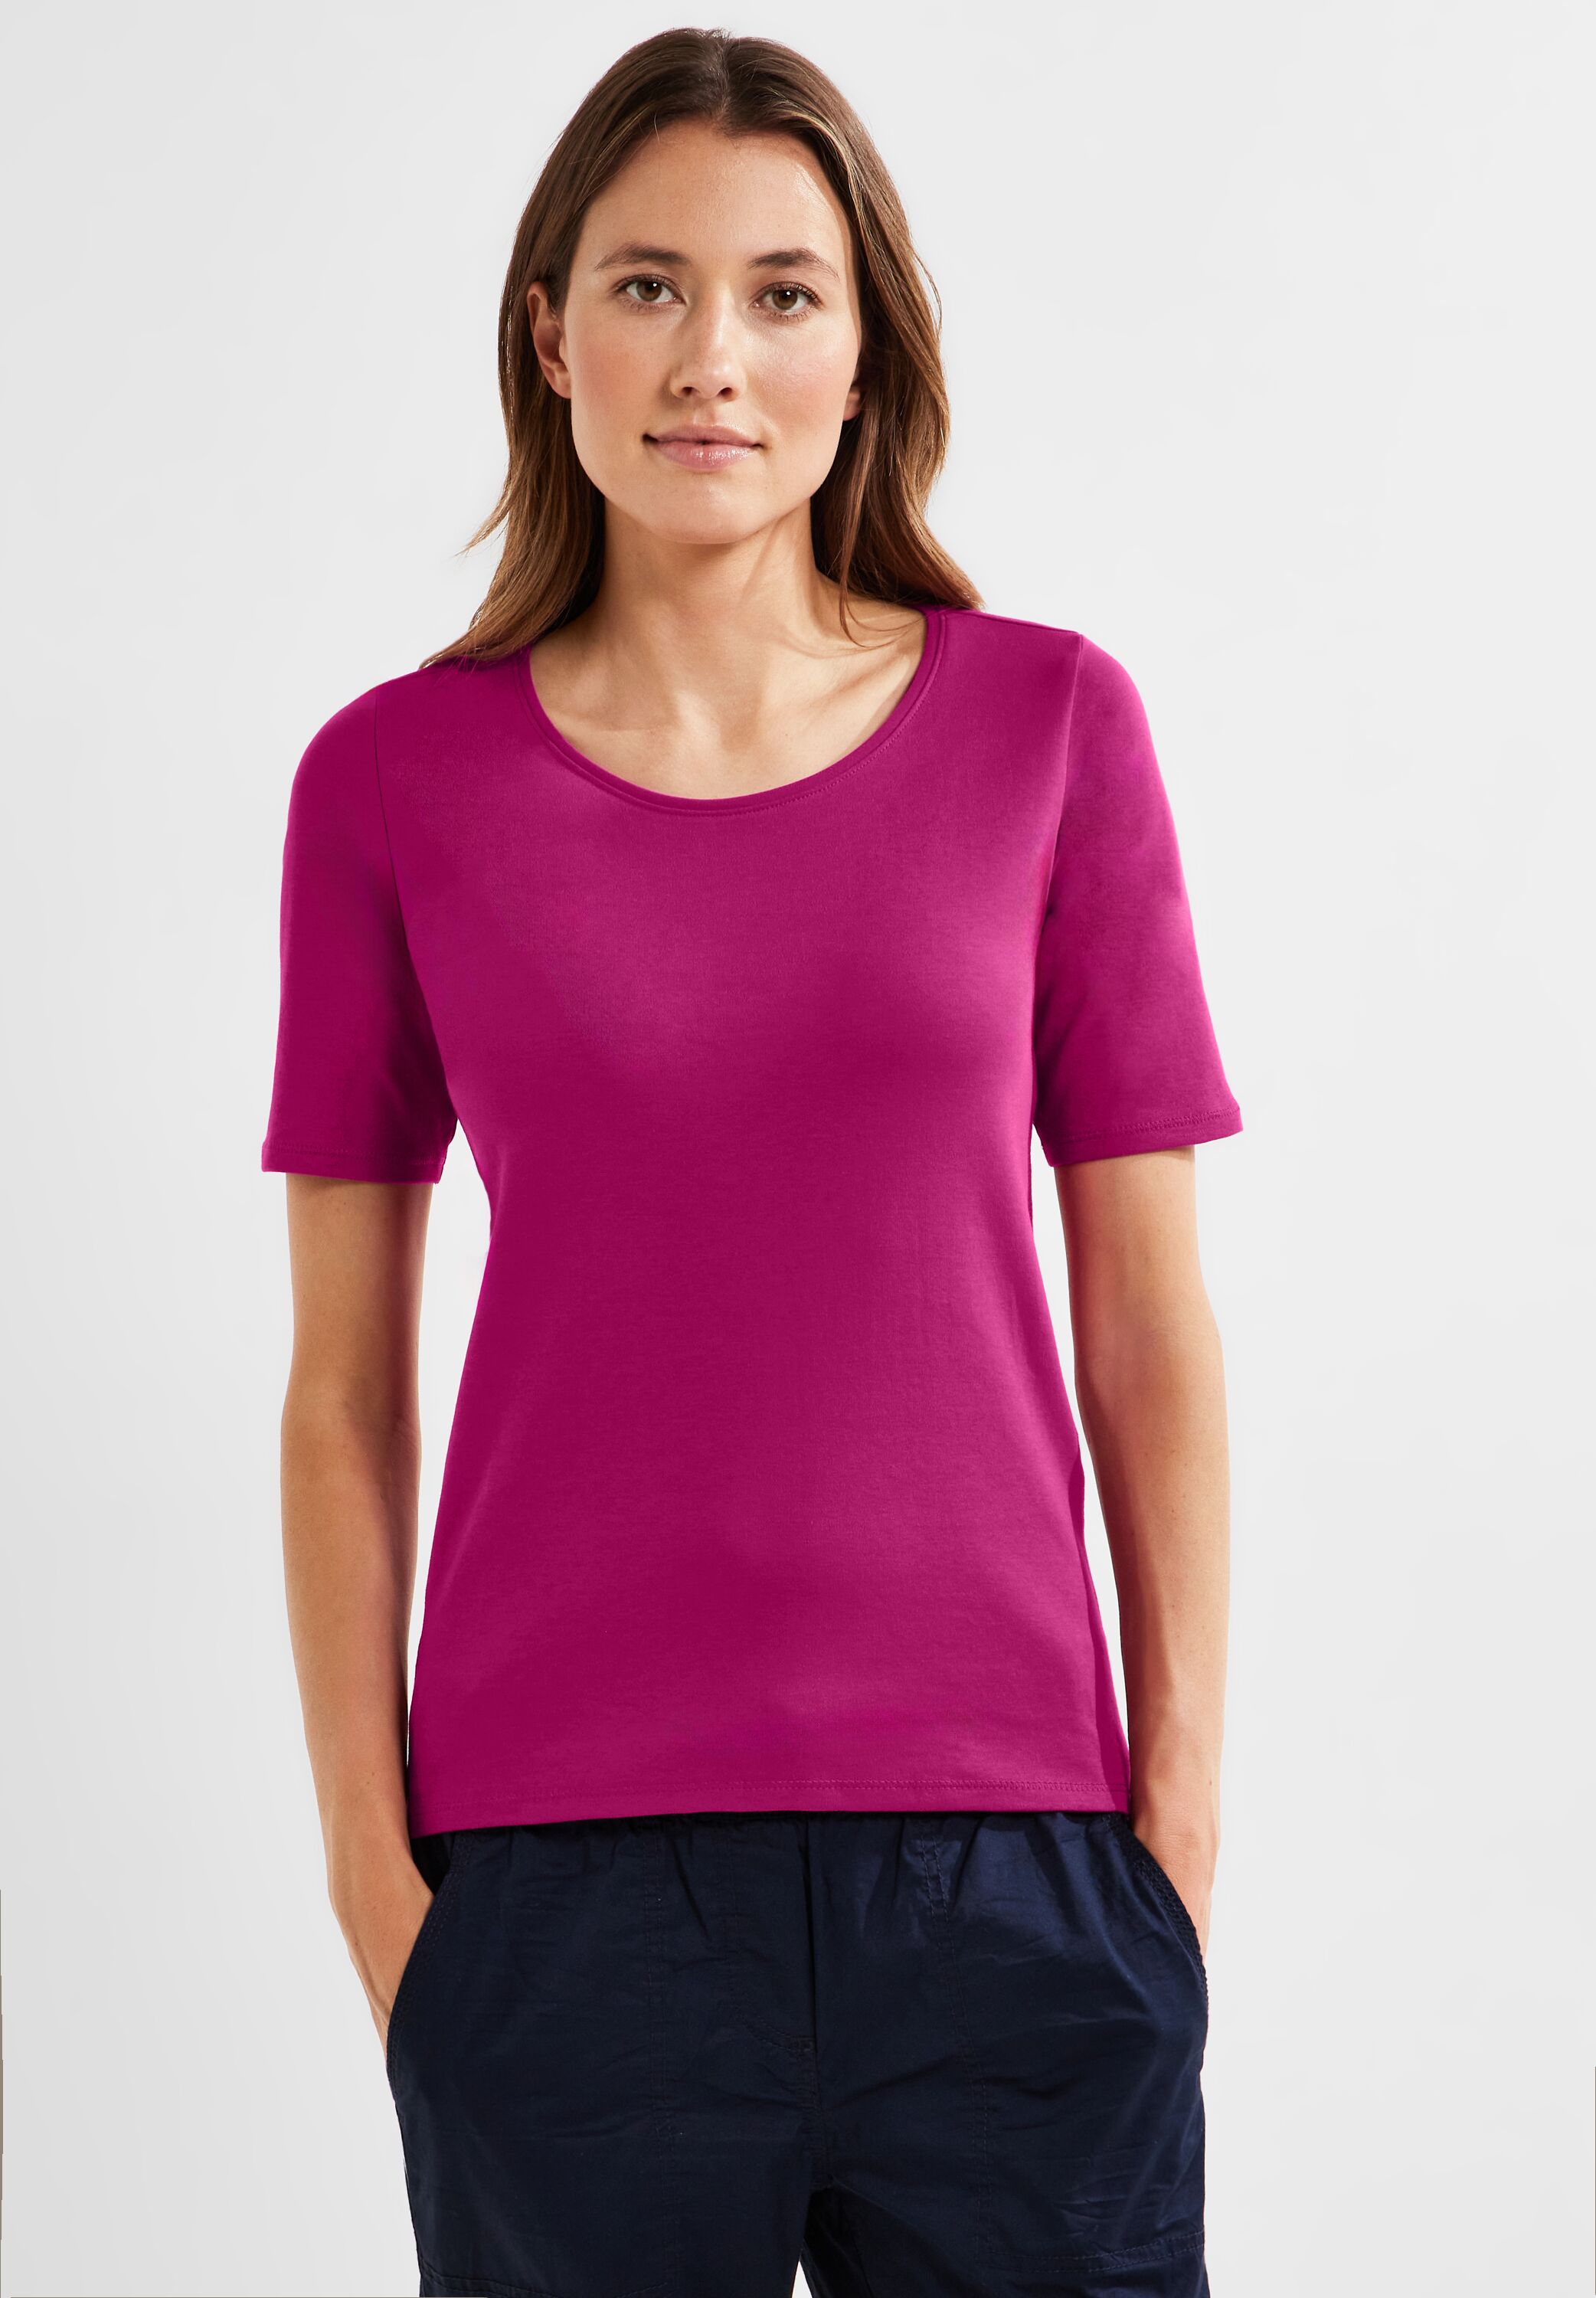 CECIL T-Shirt Lena - CONCEPT in Cool B317515-15095 Pink Mode